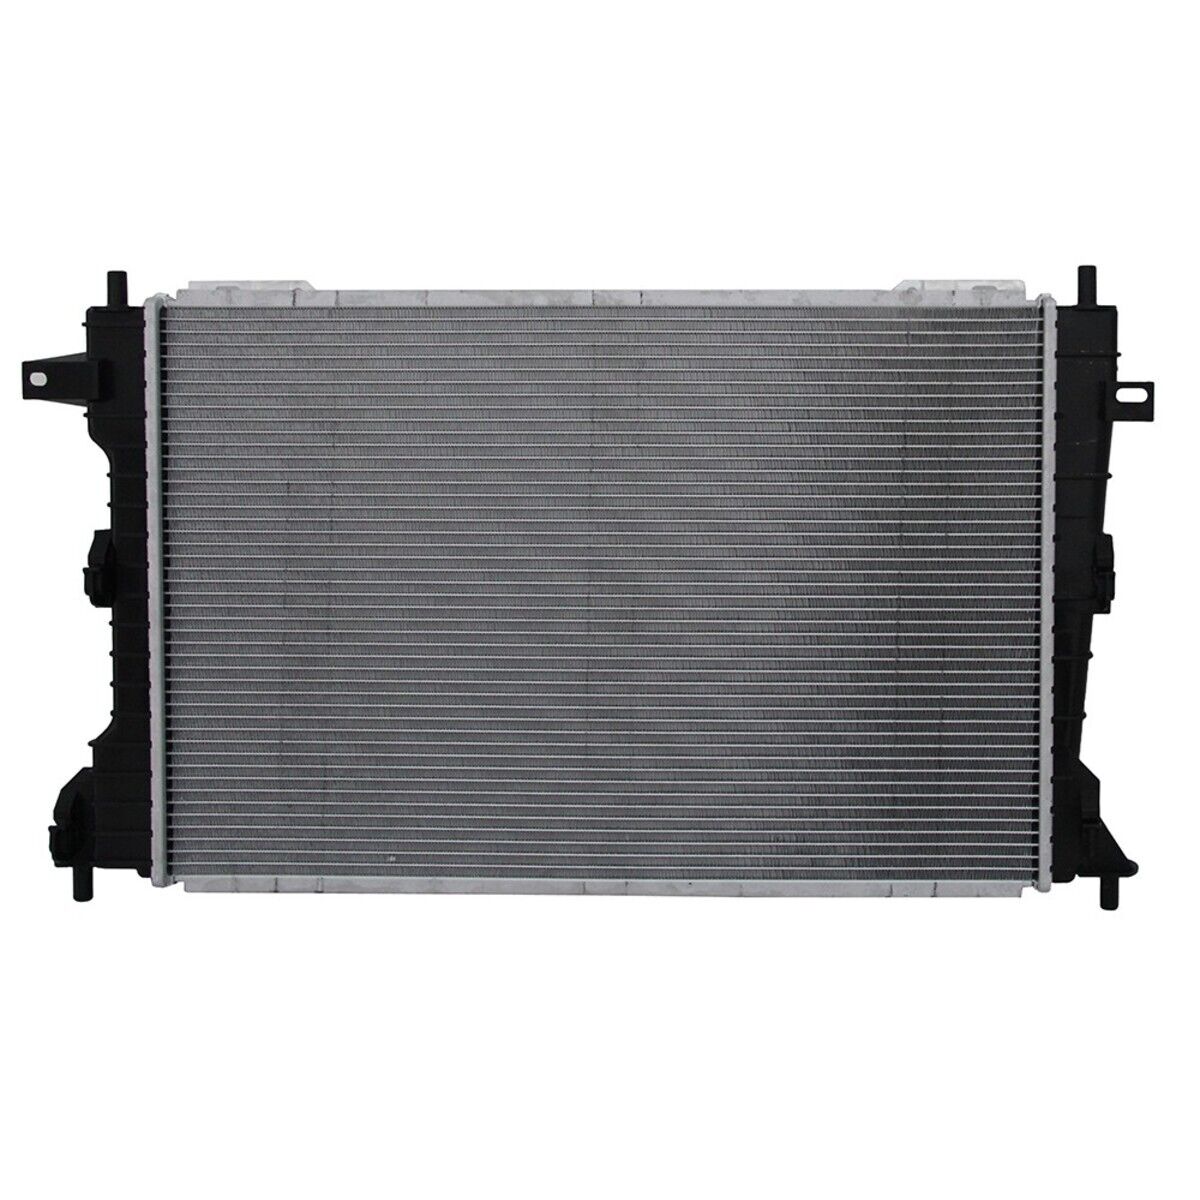 2157 One Stop Solutions Radiator for Mercury Grand Marquis Ford Crown Victoria